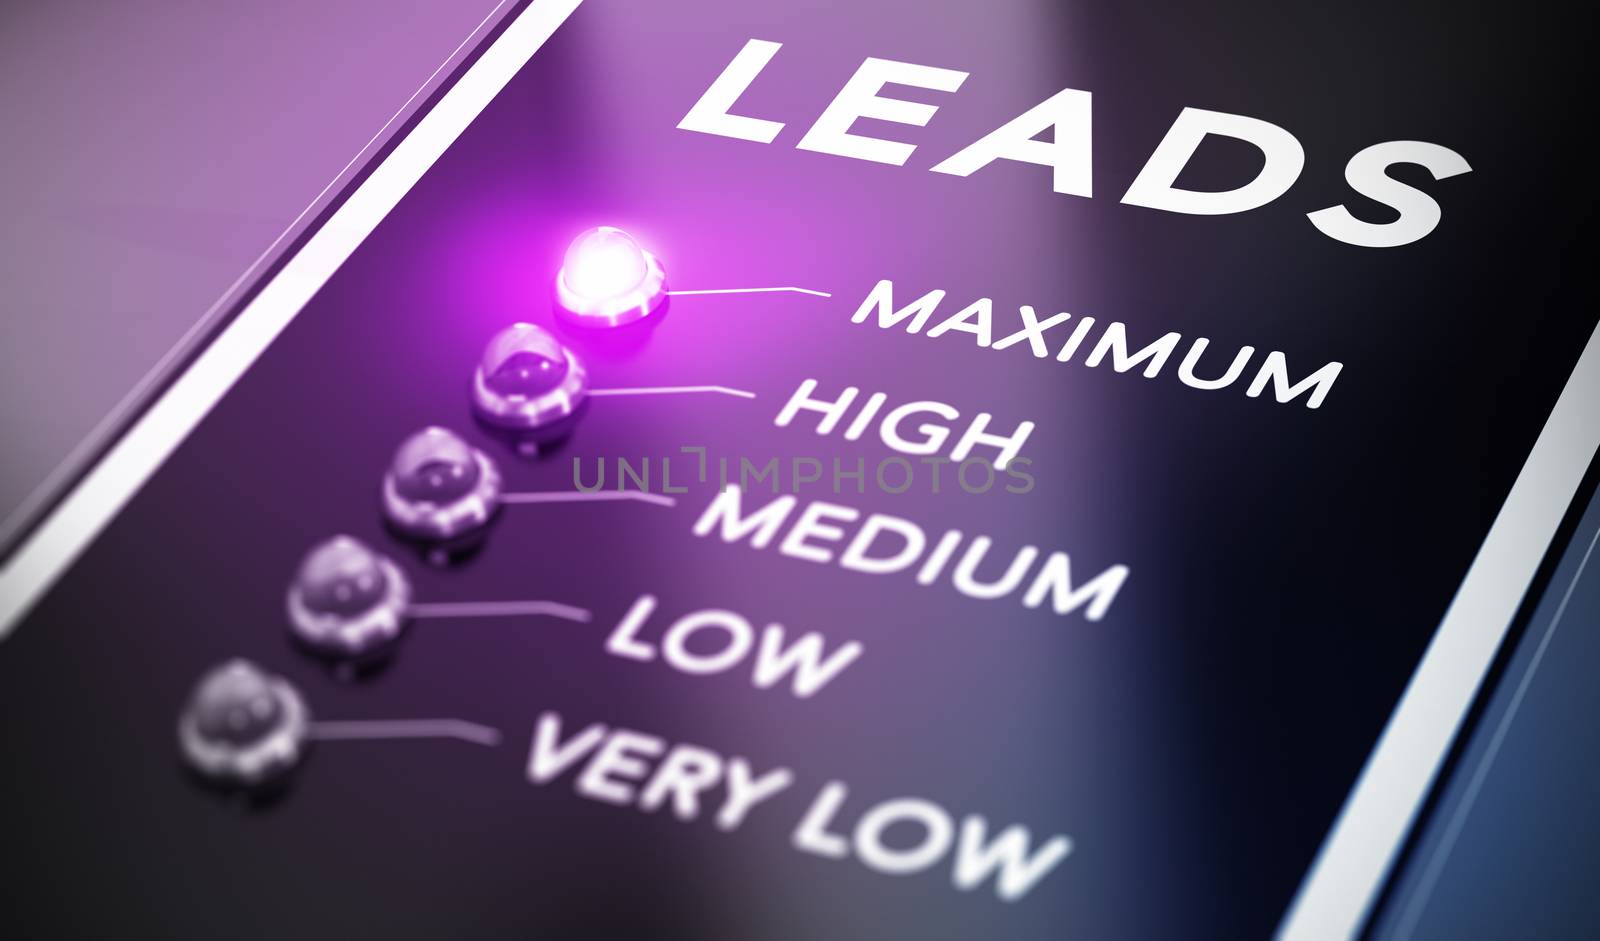 Lead Generation by Olivier-Le-Moal